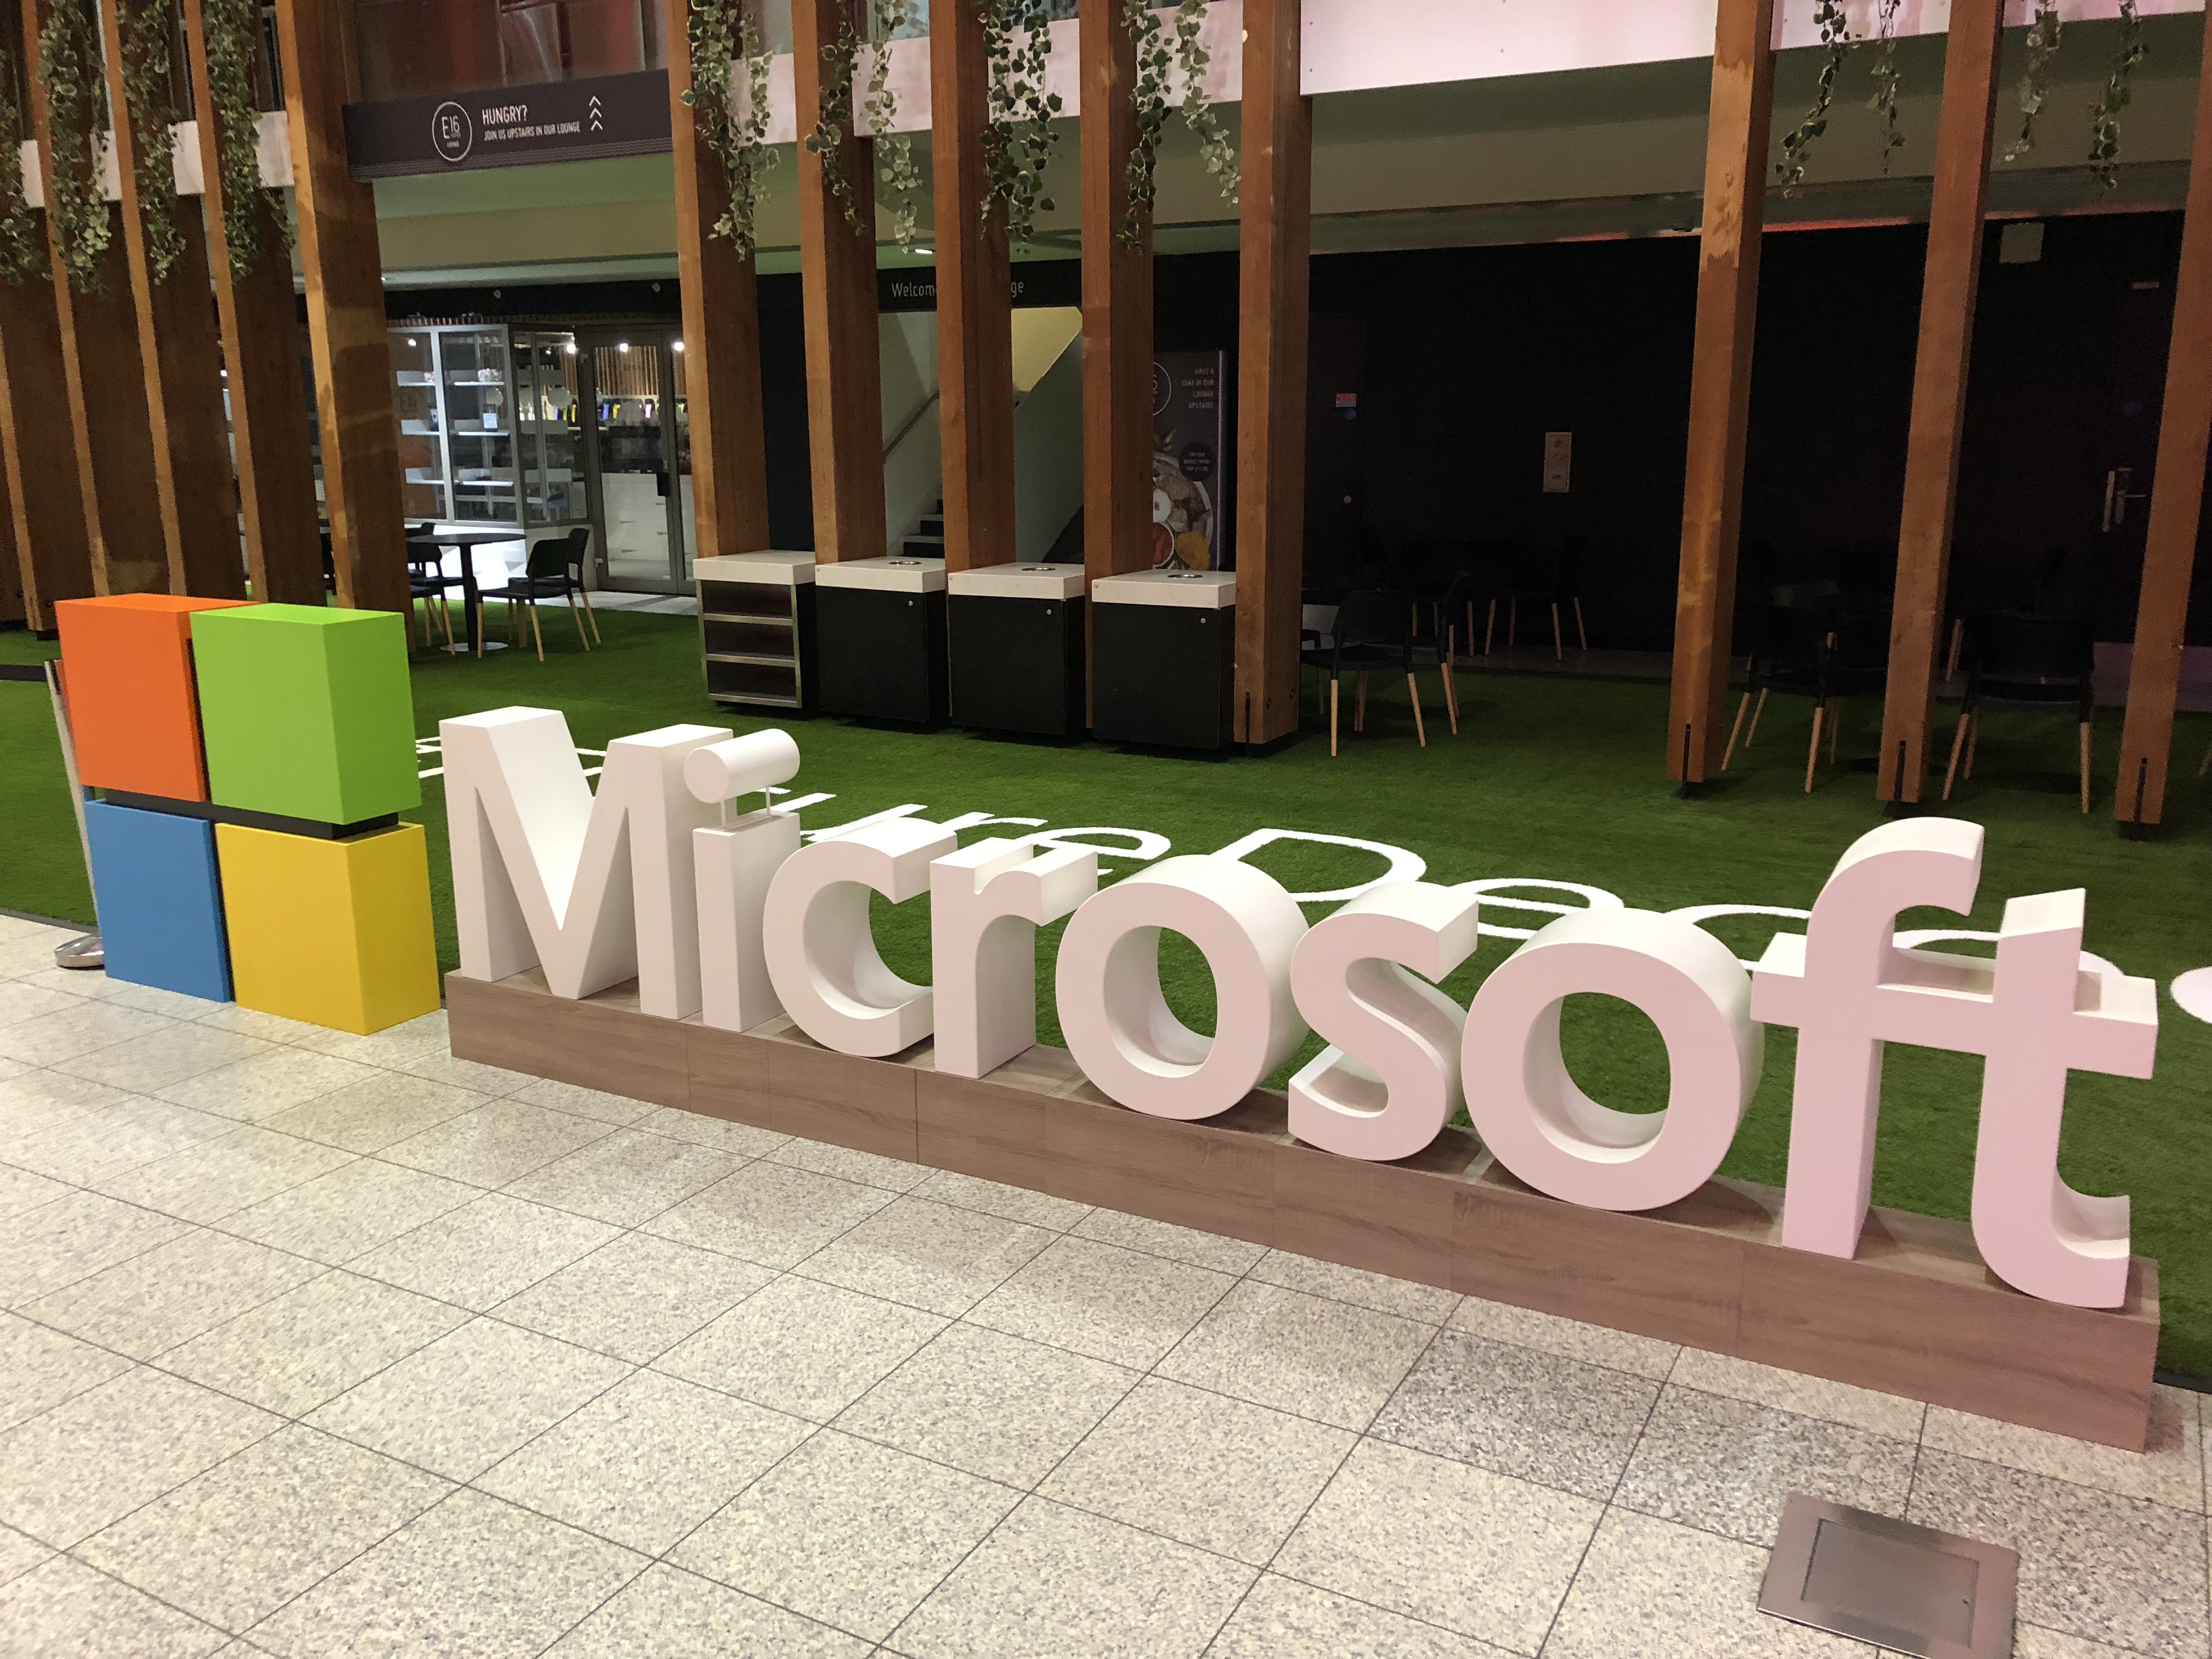 Microsoft sign at Future Decoded